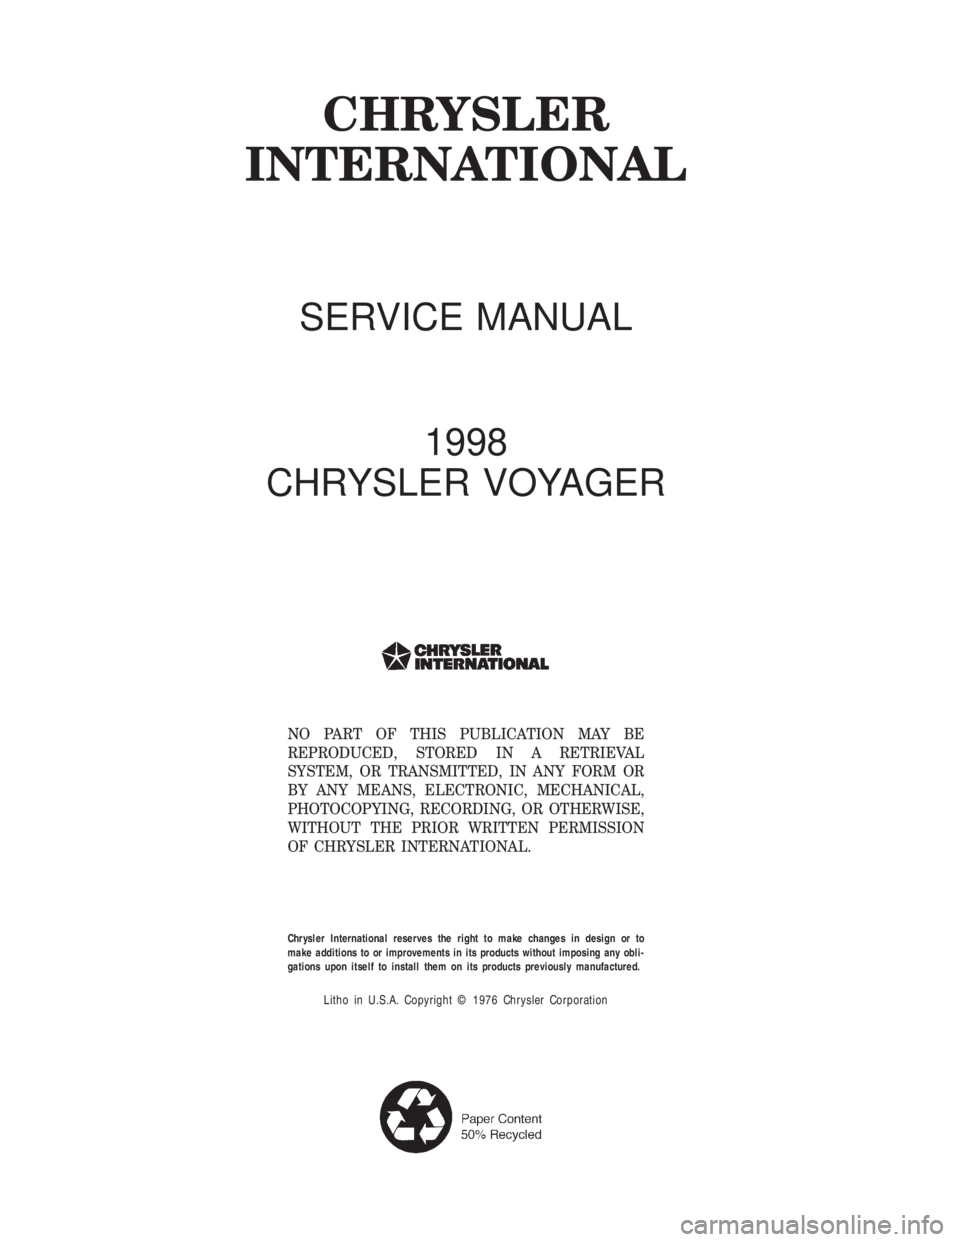 CHRYSLER VOYAGER 1996  Service Manual CHRYSLER
INTERNATIONAL
SERVICE MANUAL
1998
CHRYSLER VOYAGER
NO PART OF THIS PUBLICATION MAY BE
REPRODUCED, STORED IN A RETRIEVAL
SYSTEM, OR TRANSMITTED, IN ANY FORM OR
BY ANY MEANS, ELECTRONIC, MECHAN